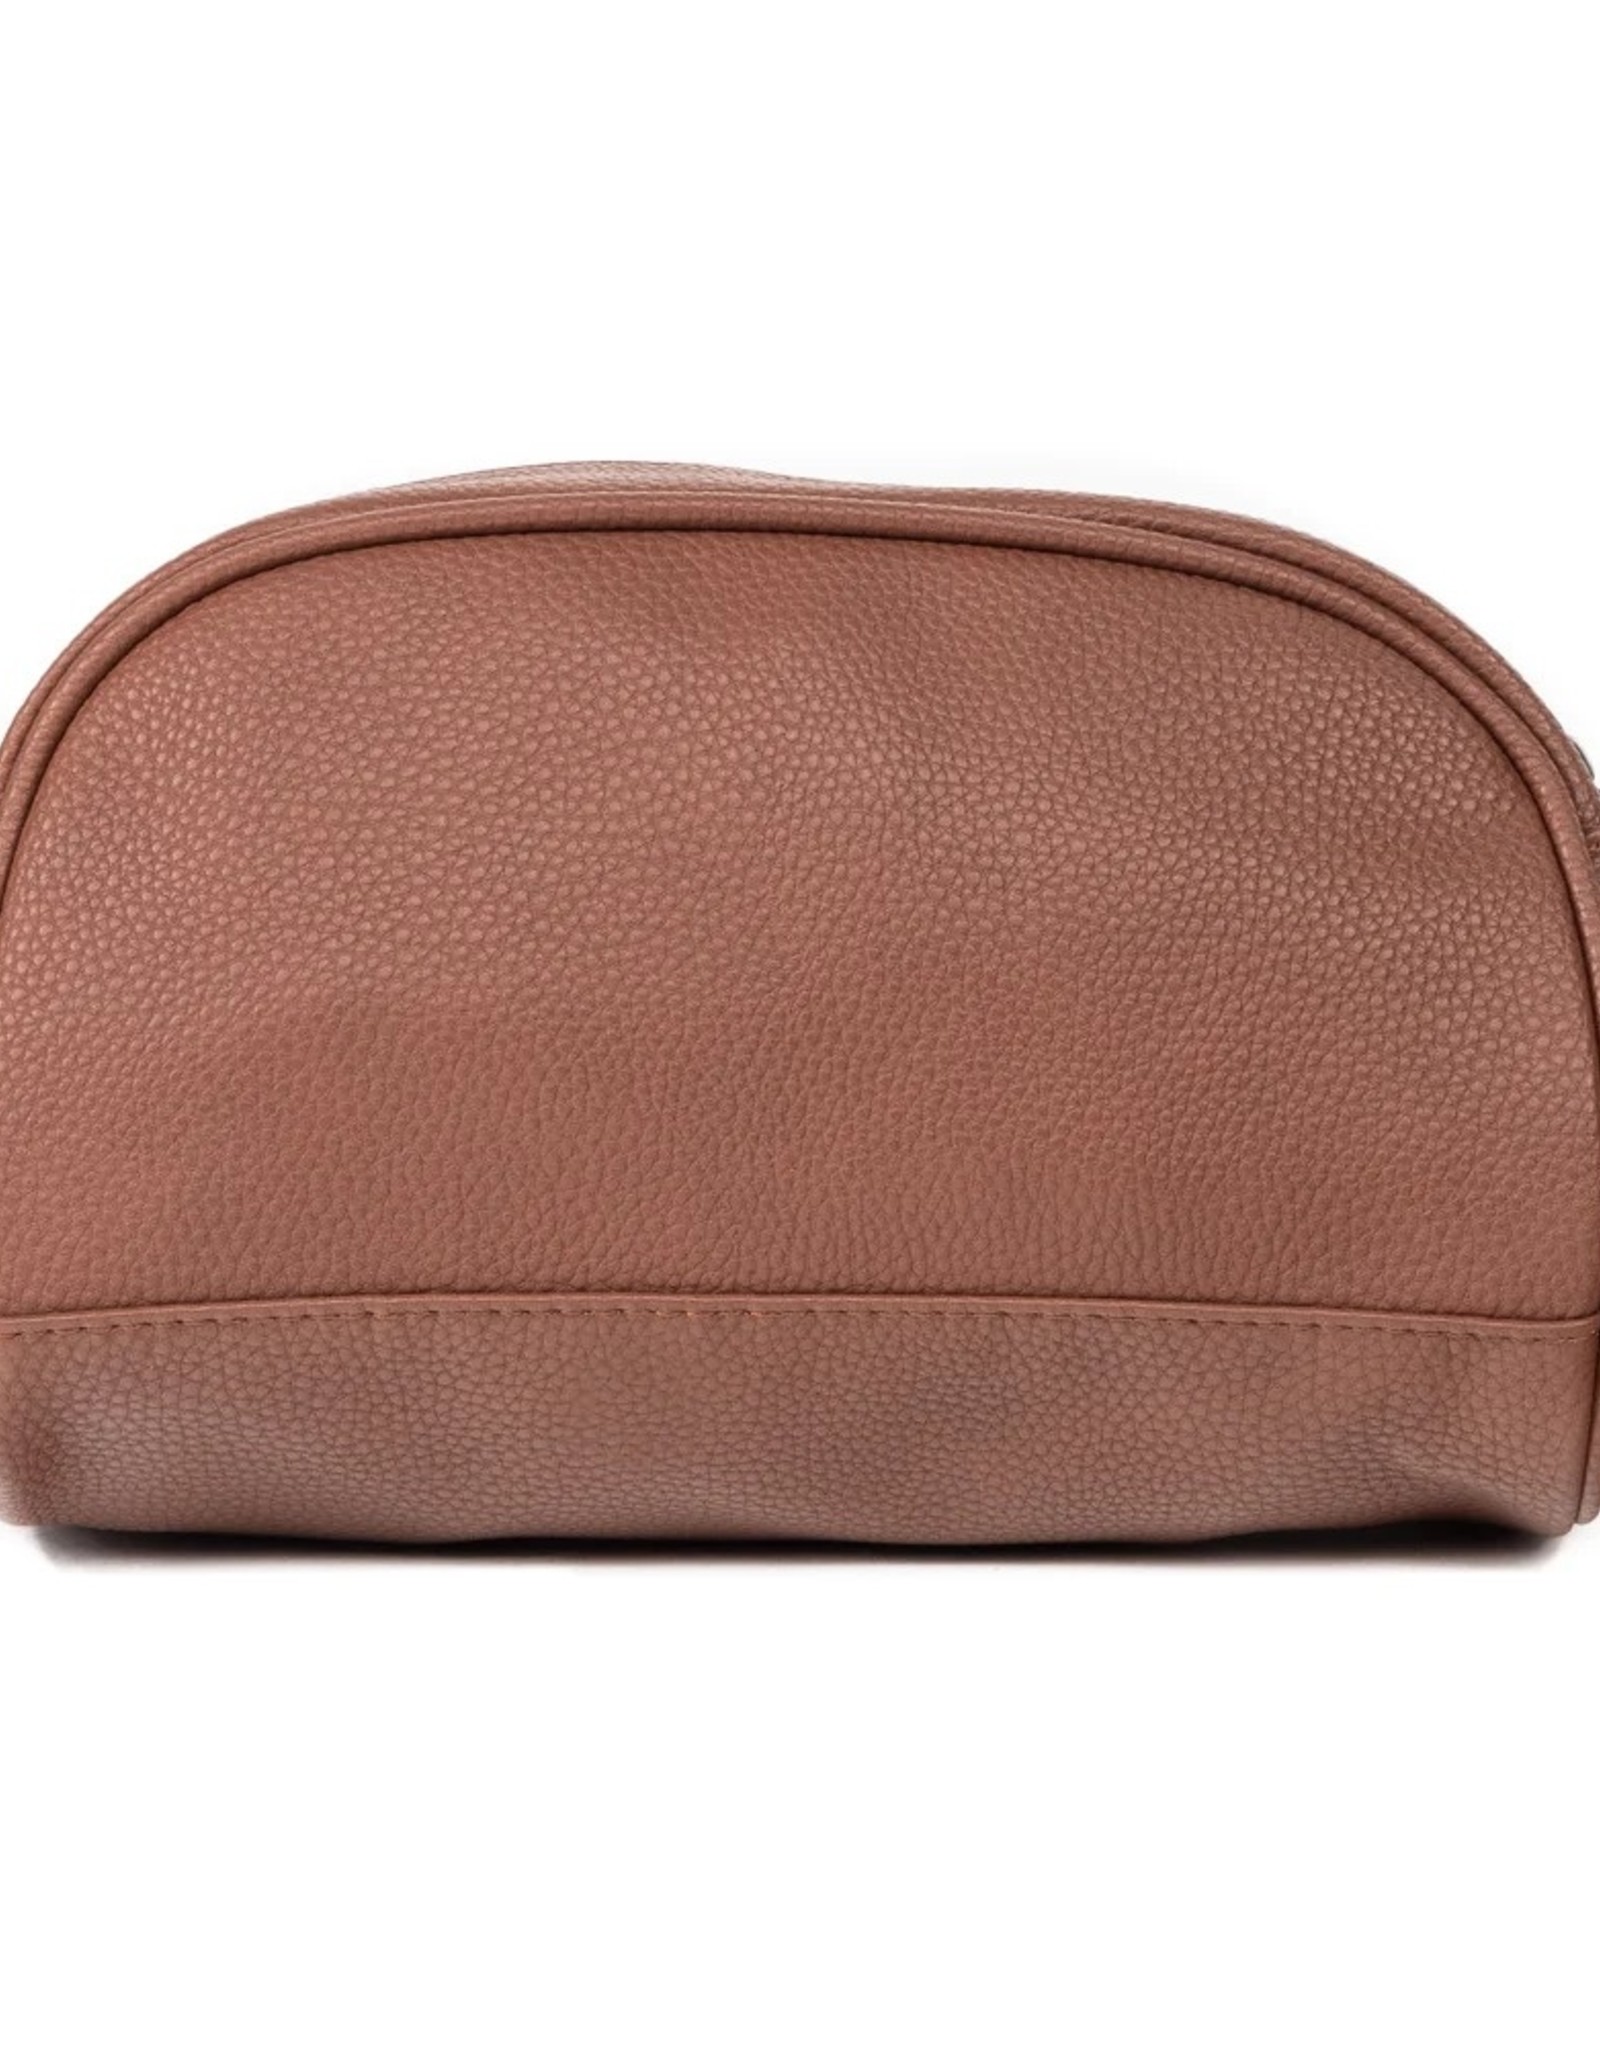 Brouk and Co. Davidson Toiletry Bag